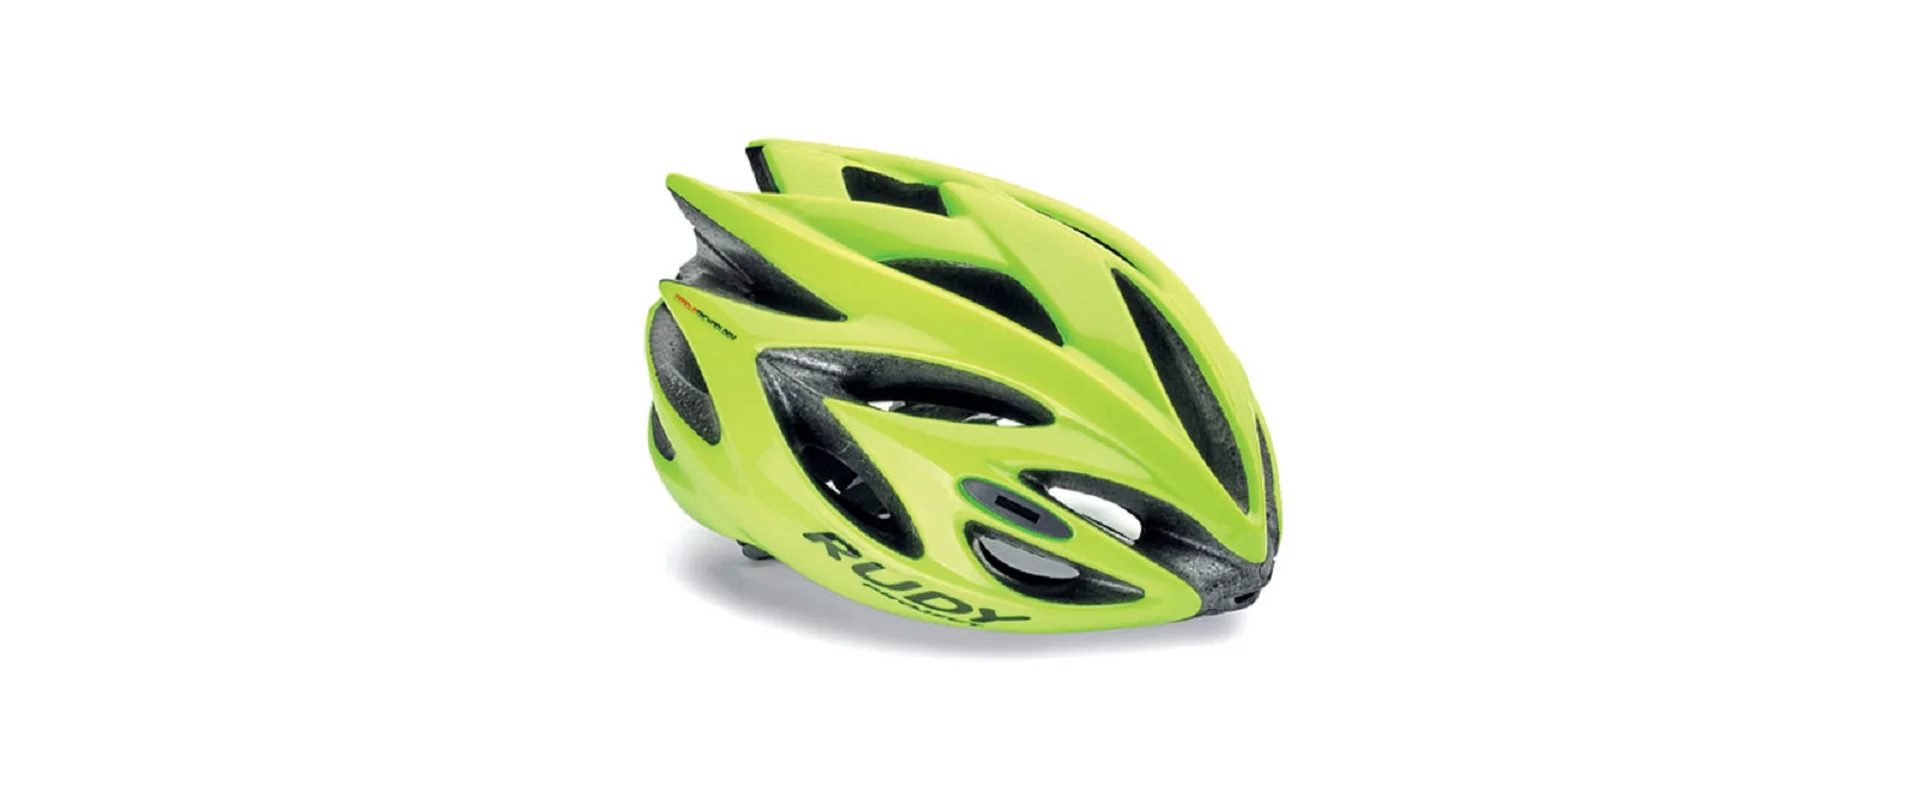 Rudy Project Rush Yellow Fluo Shiny L / Шлем